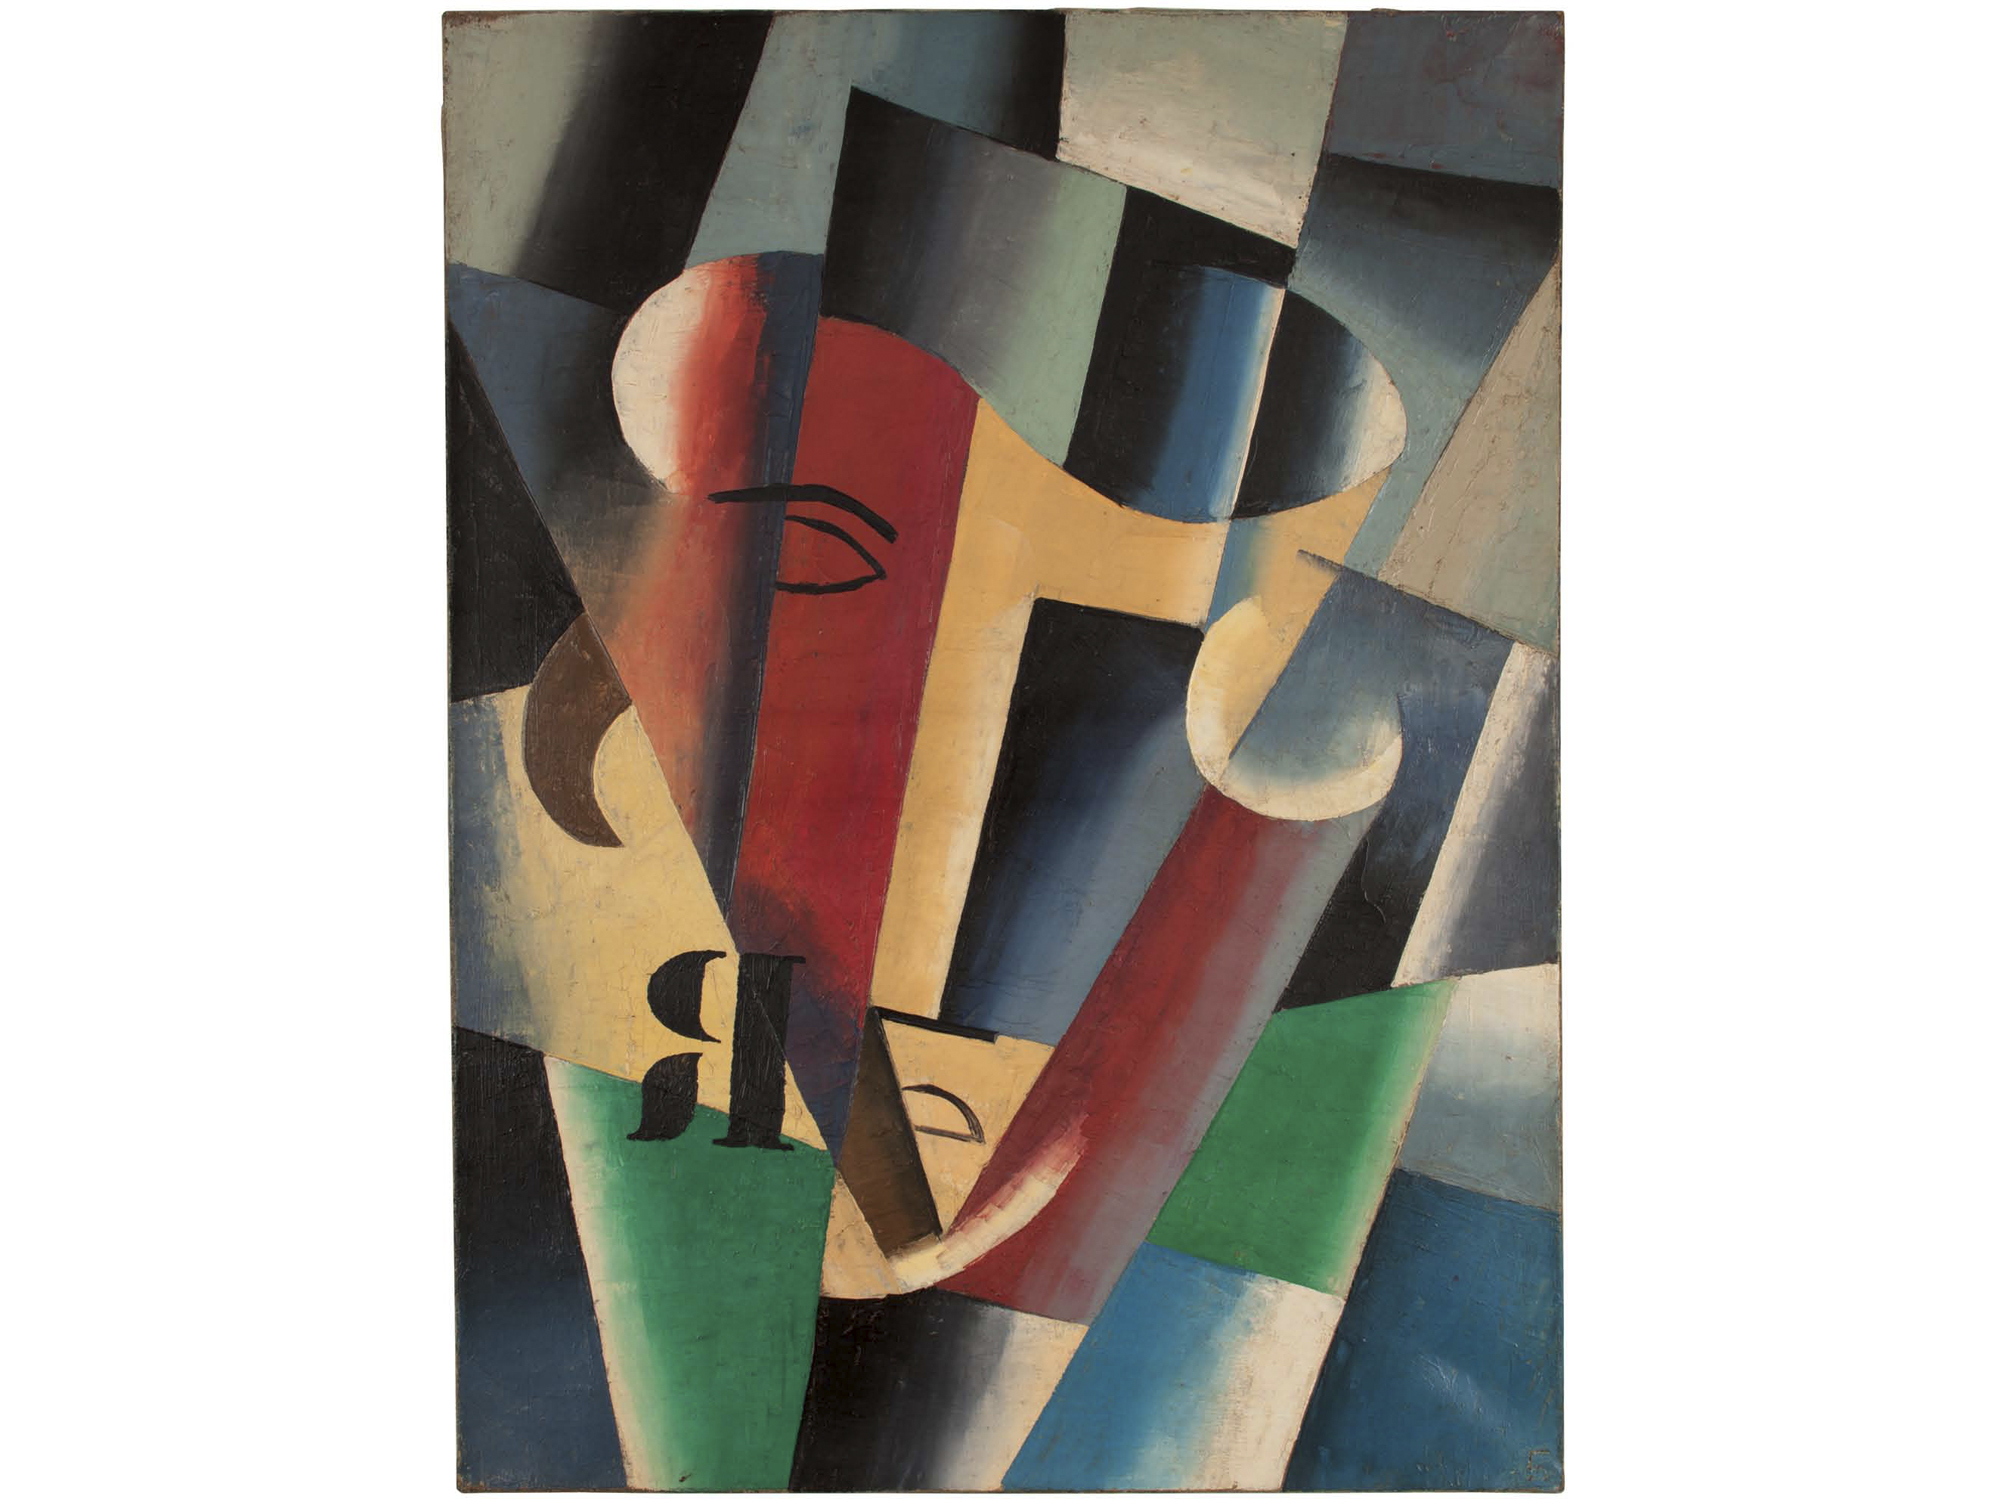   Unattributed.     In the style of Lyubov Popova.&nbsp;   Signed “B” in Russian, lower right front.   Oil on canvas. 46 x 61 cm. 